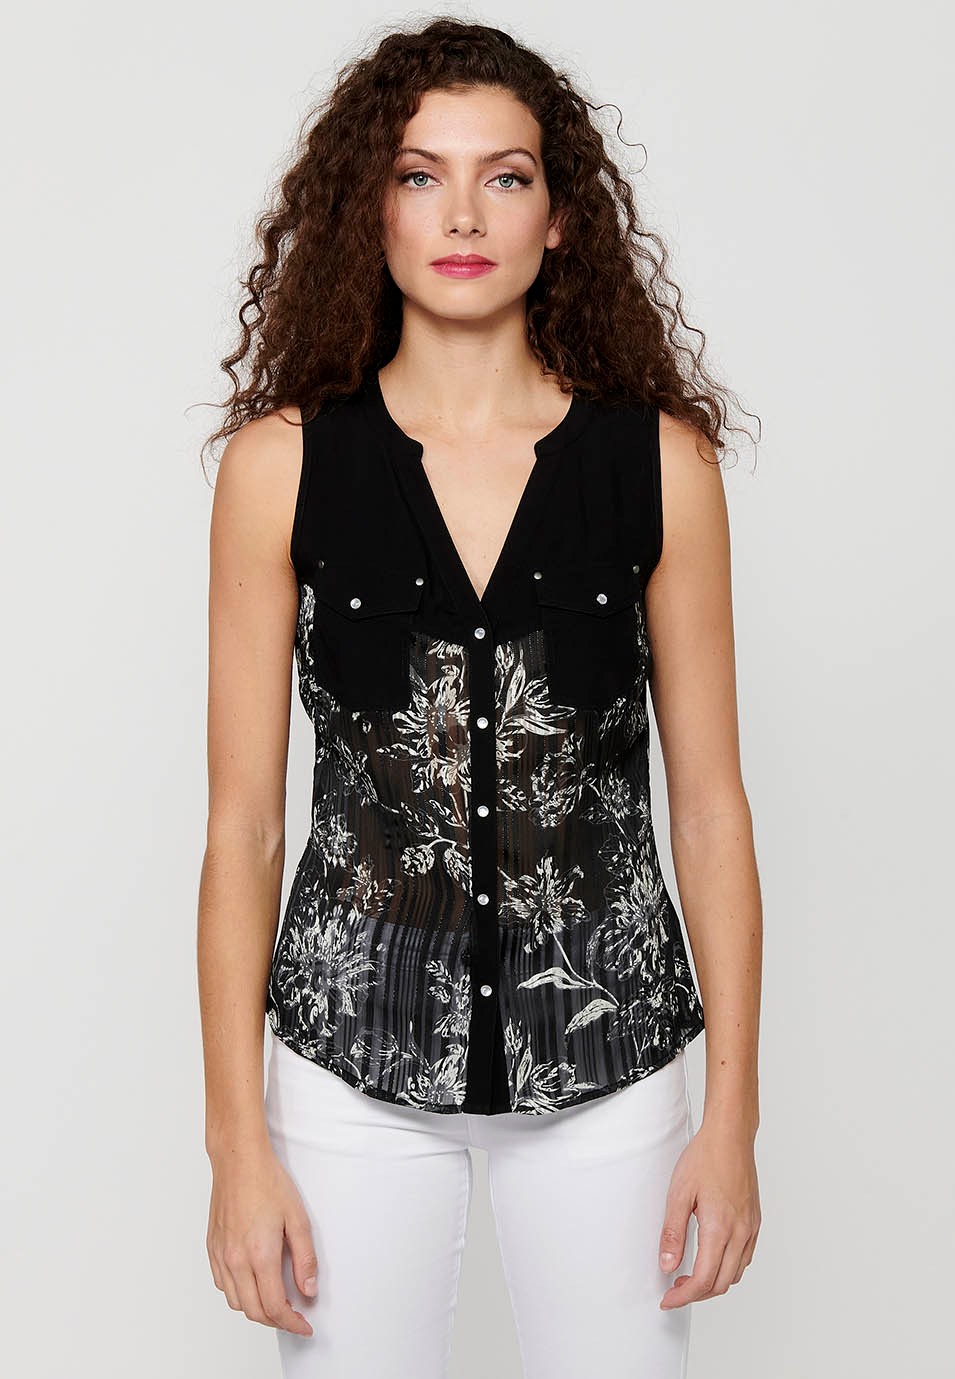 Sleeveless Blouse with Shirt Neckline and Black Floral Print for Women